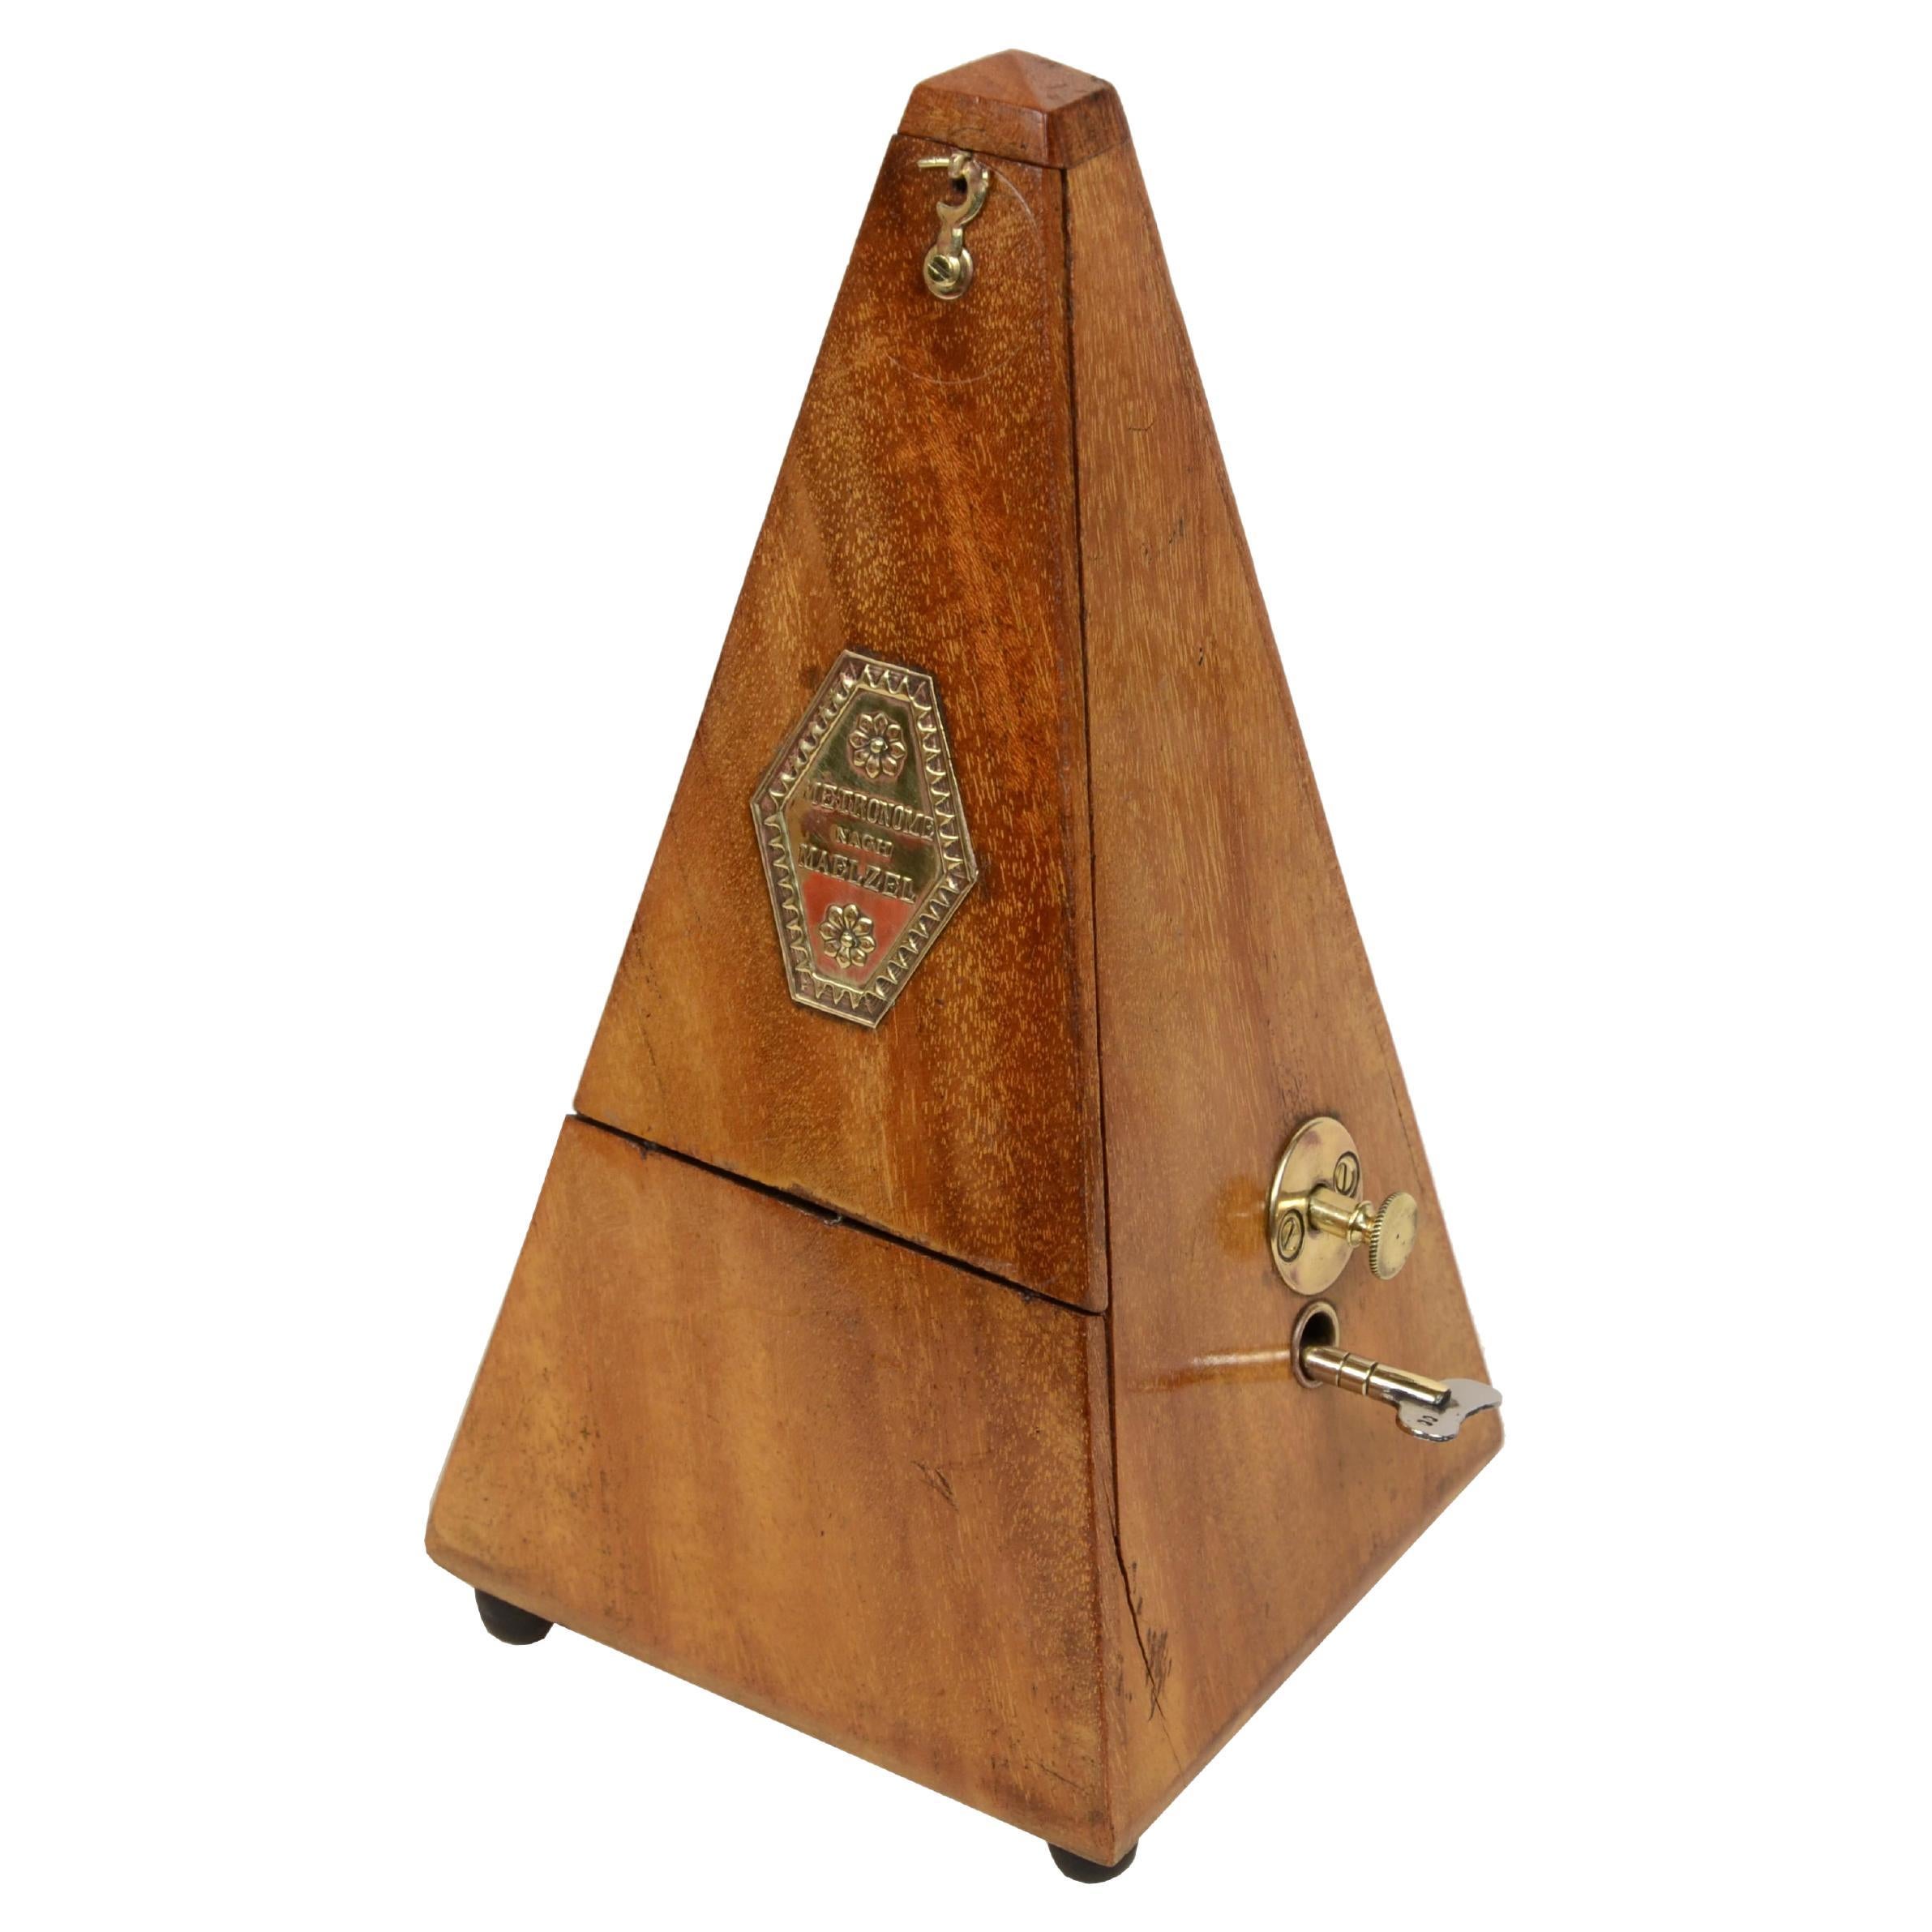 Metronome system  Johan Maelzel (1772-1838) in wood from the early 1900s.